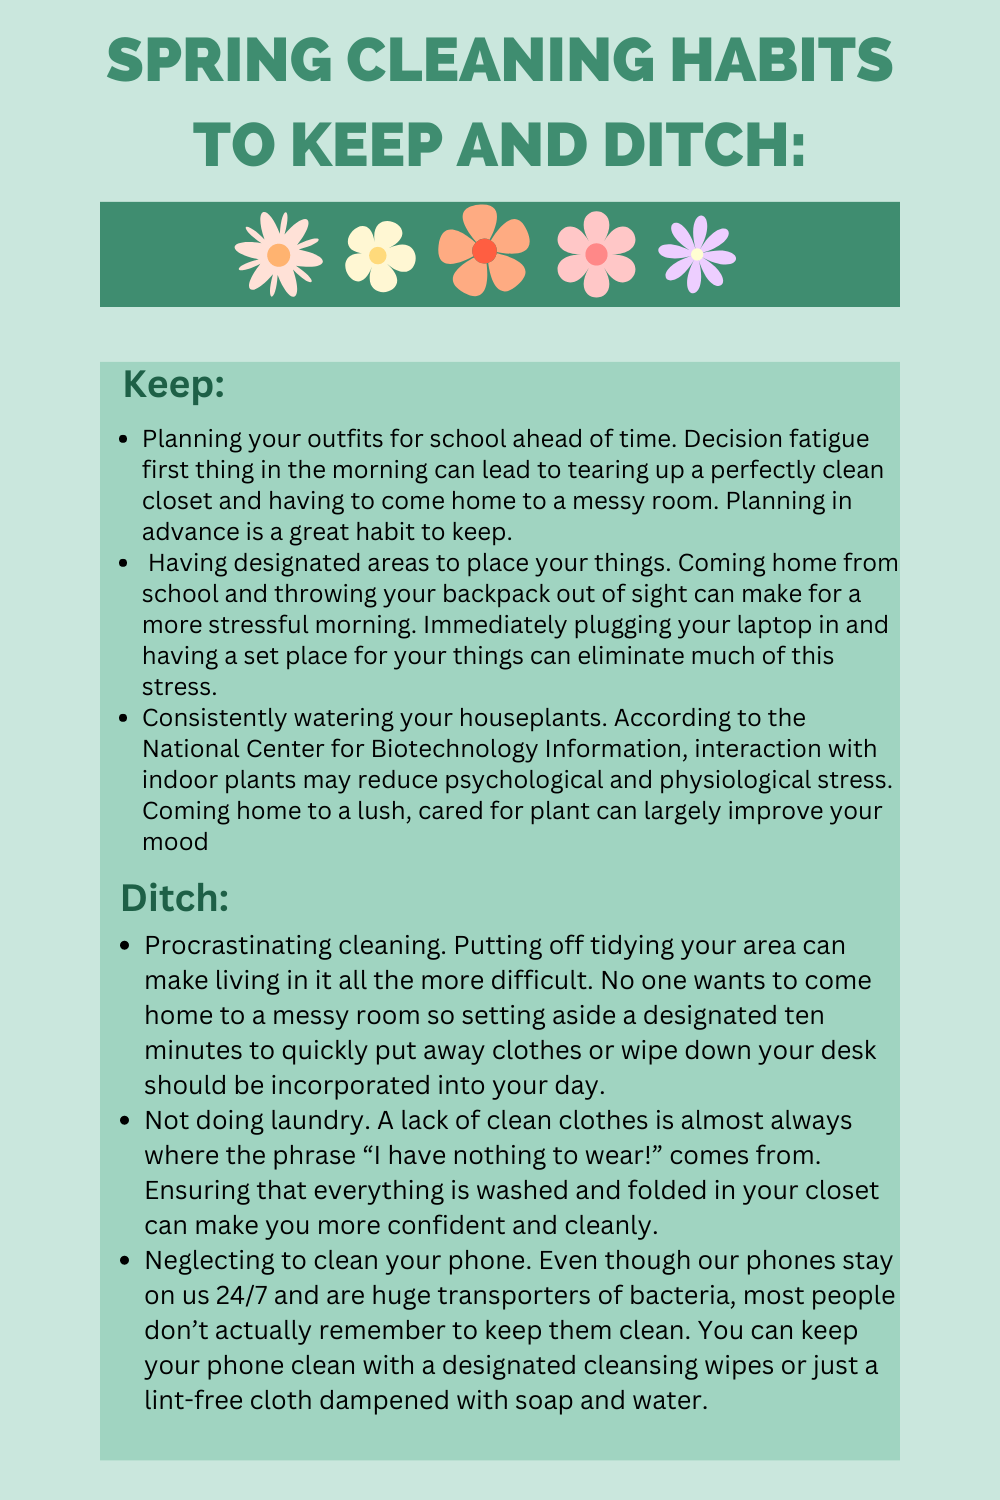 Spring cleaning habits to keep and ditch